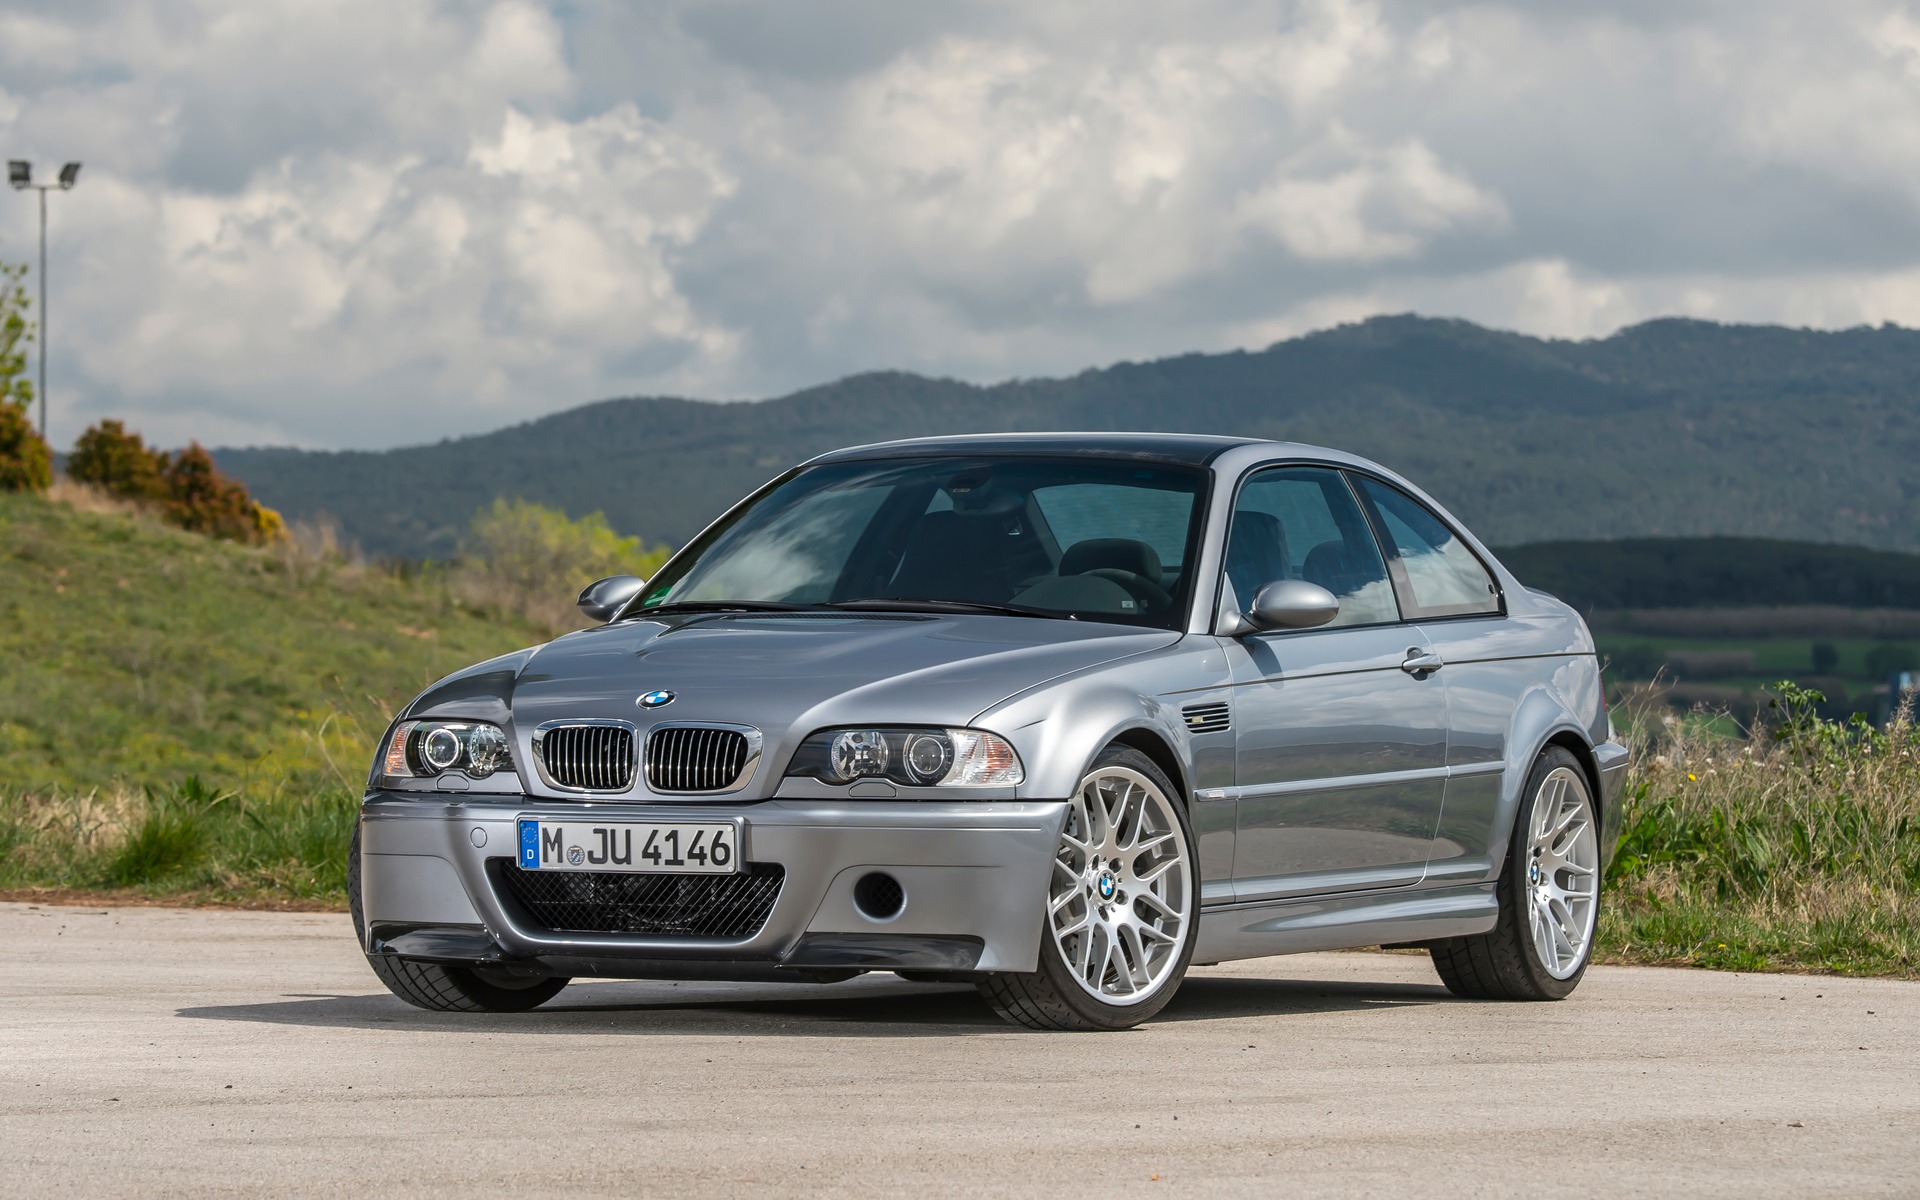 This is a rare and expensive car, the M3 CSL 